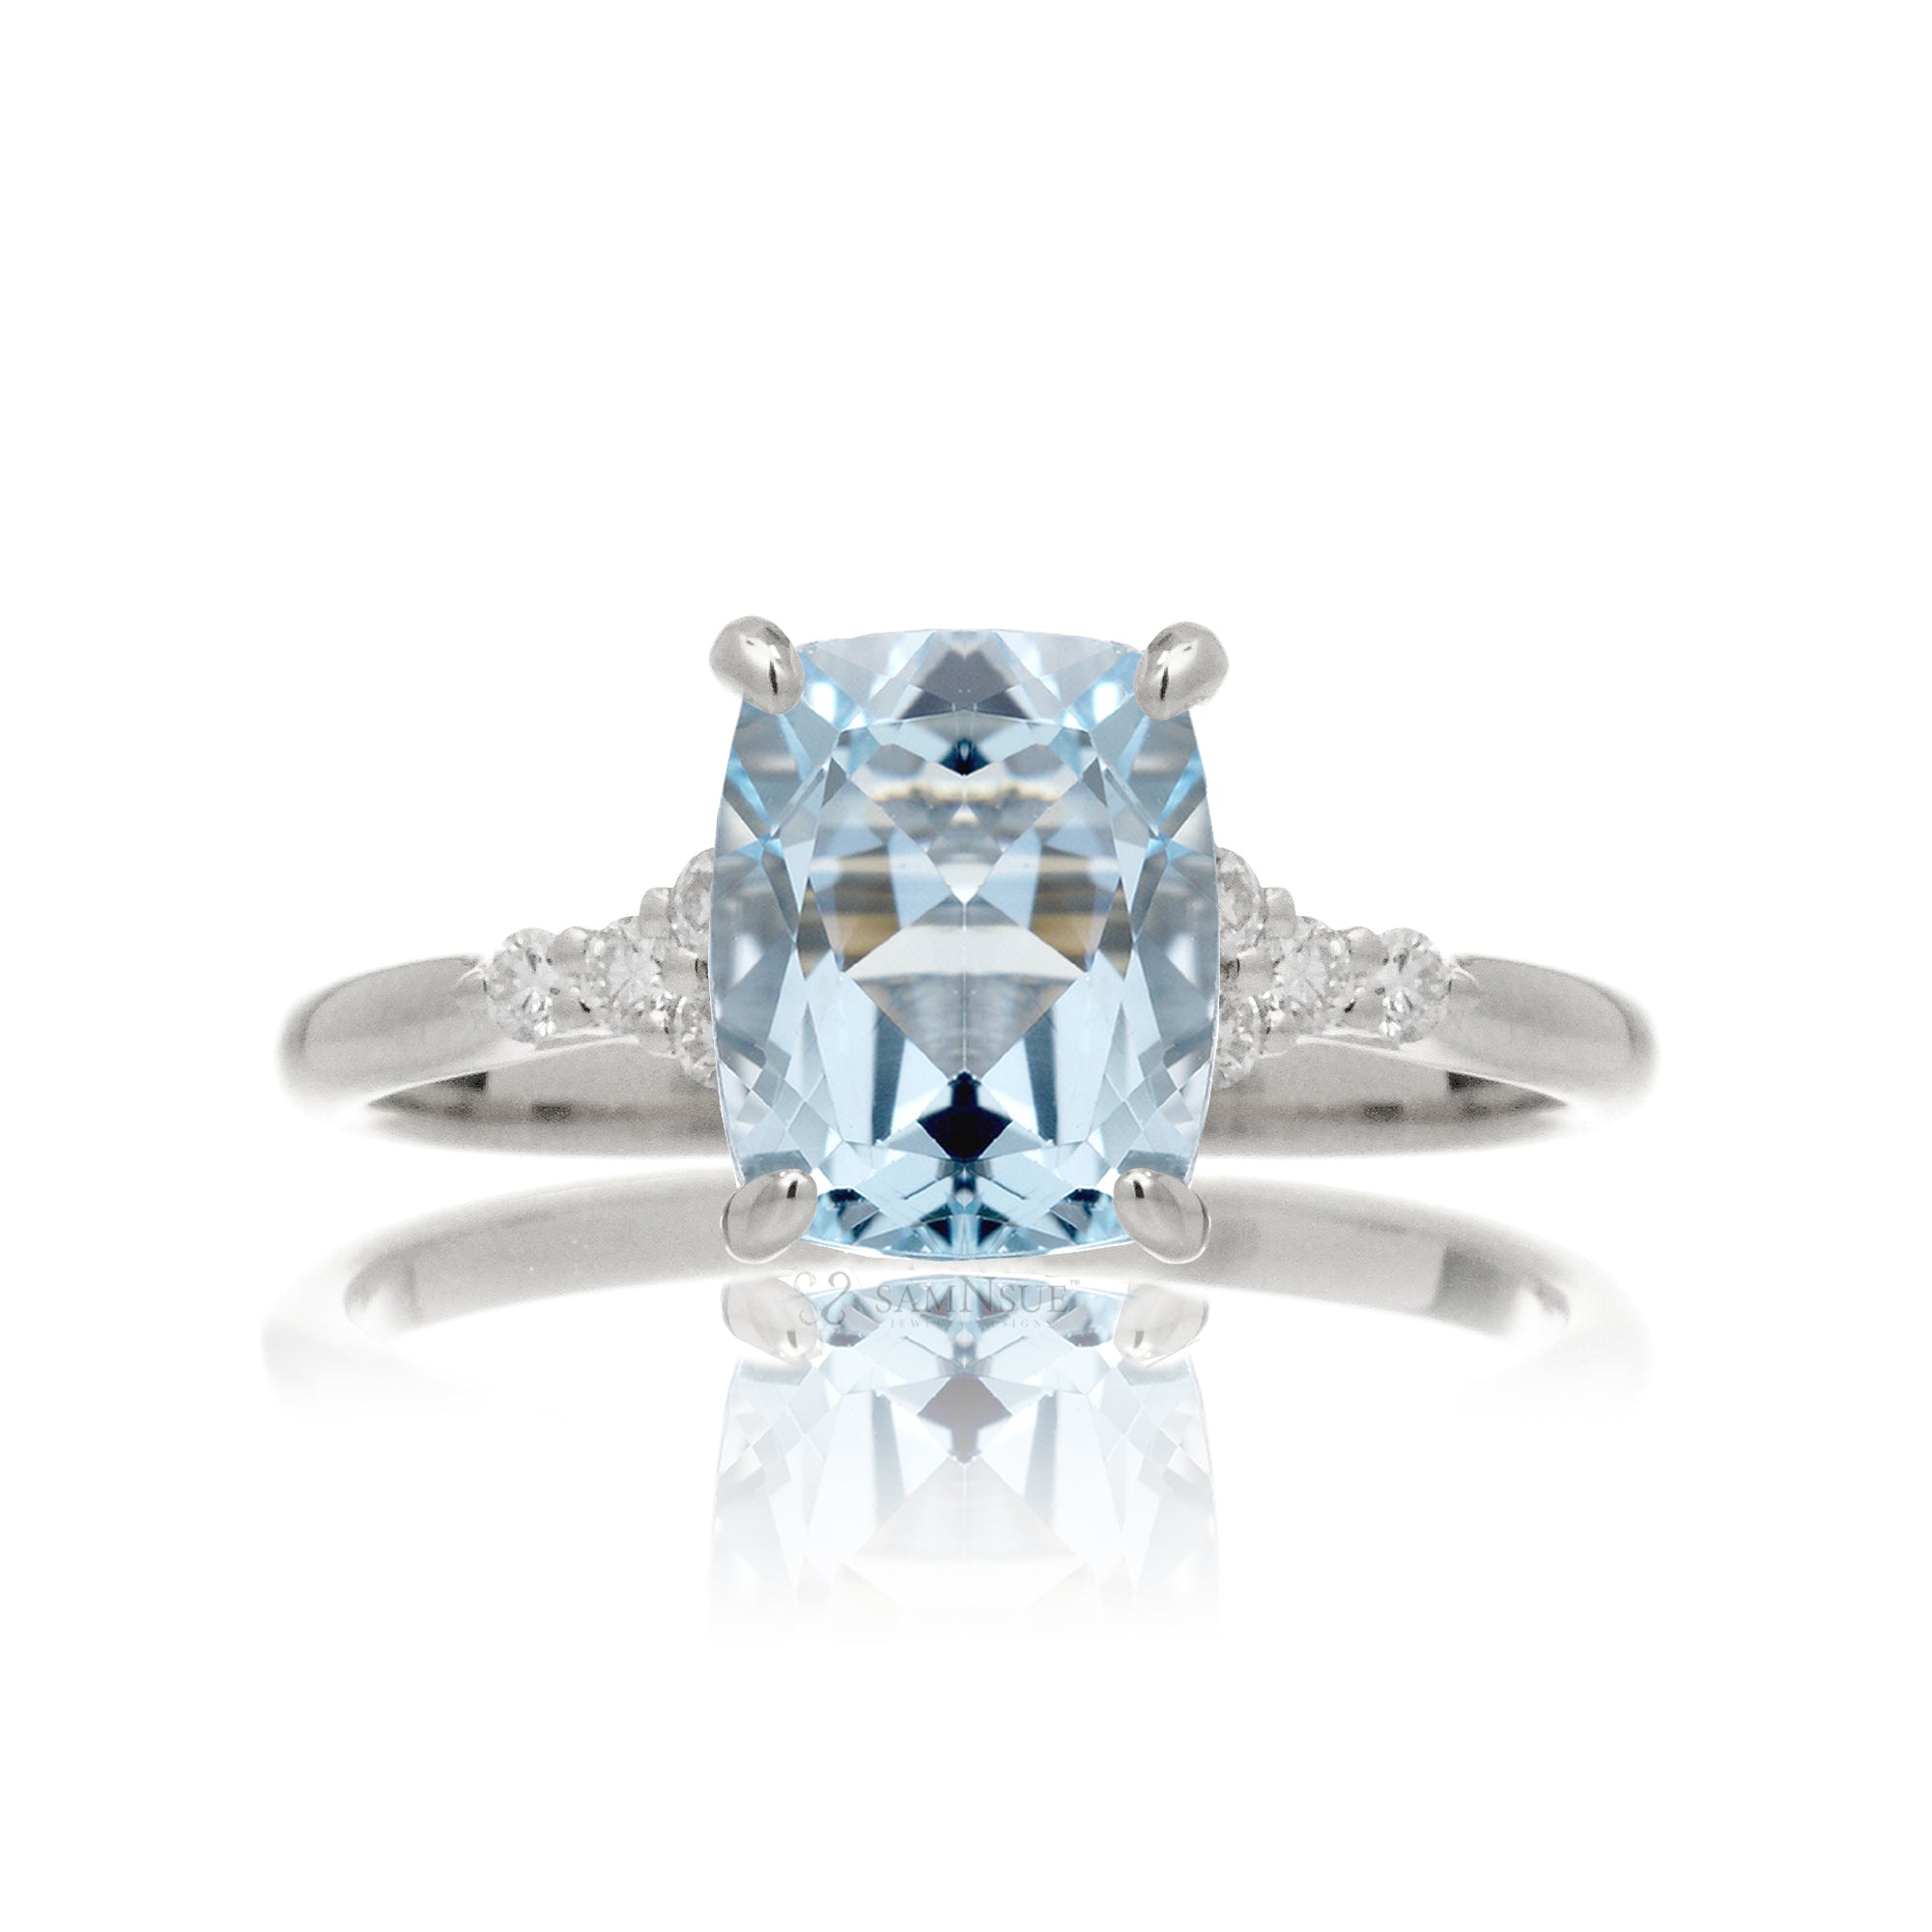 Aquamarine engagement ring cushion cut and solid band in white gold